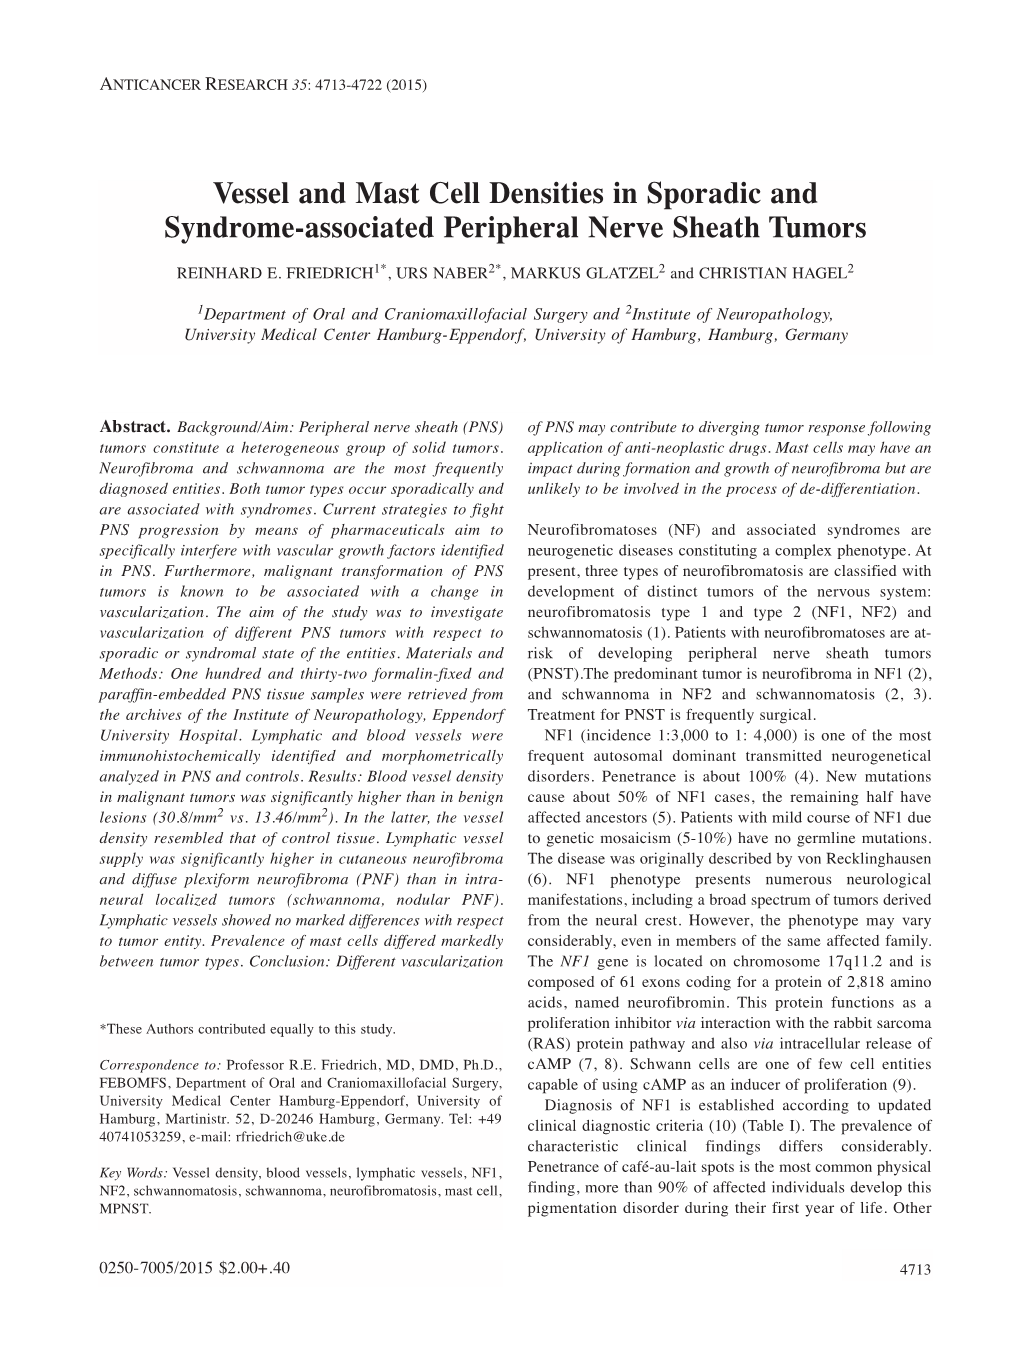 Vessel and Mast Cell Densities in Sporadic and Syndrome-Associated Peripheral Nerve Sheath Tumors